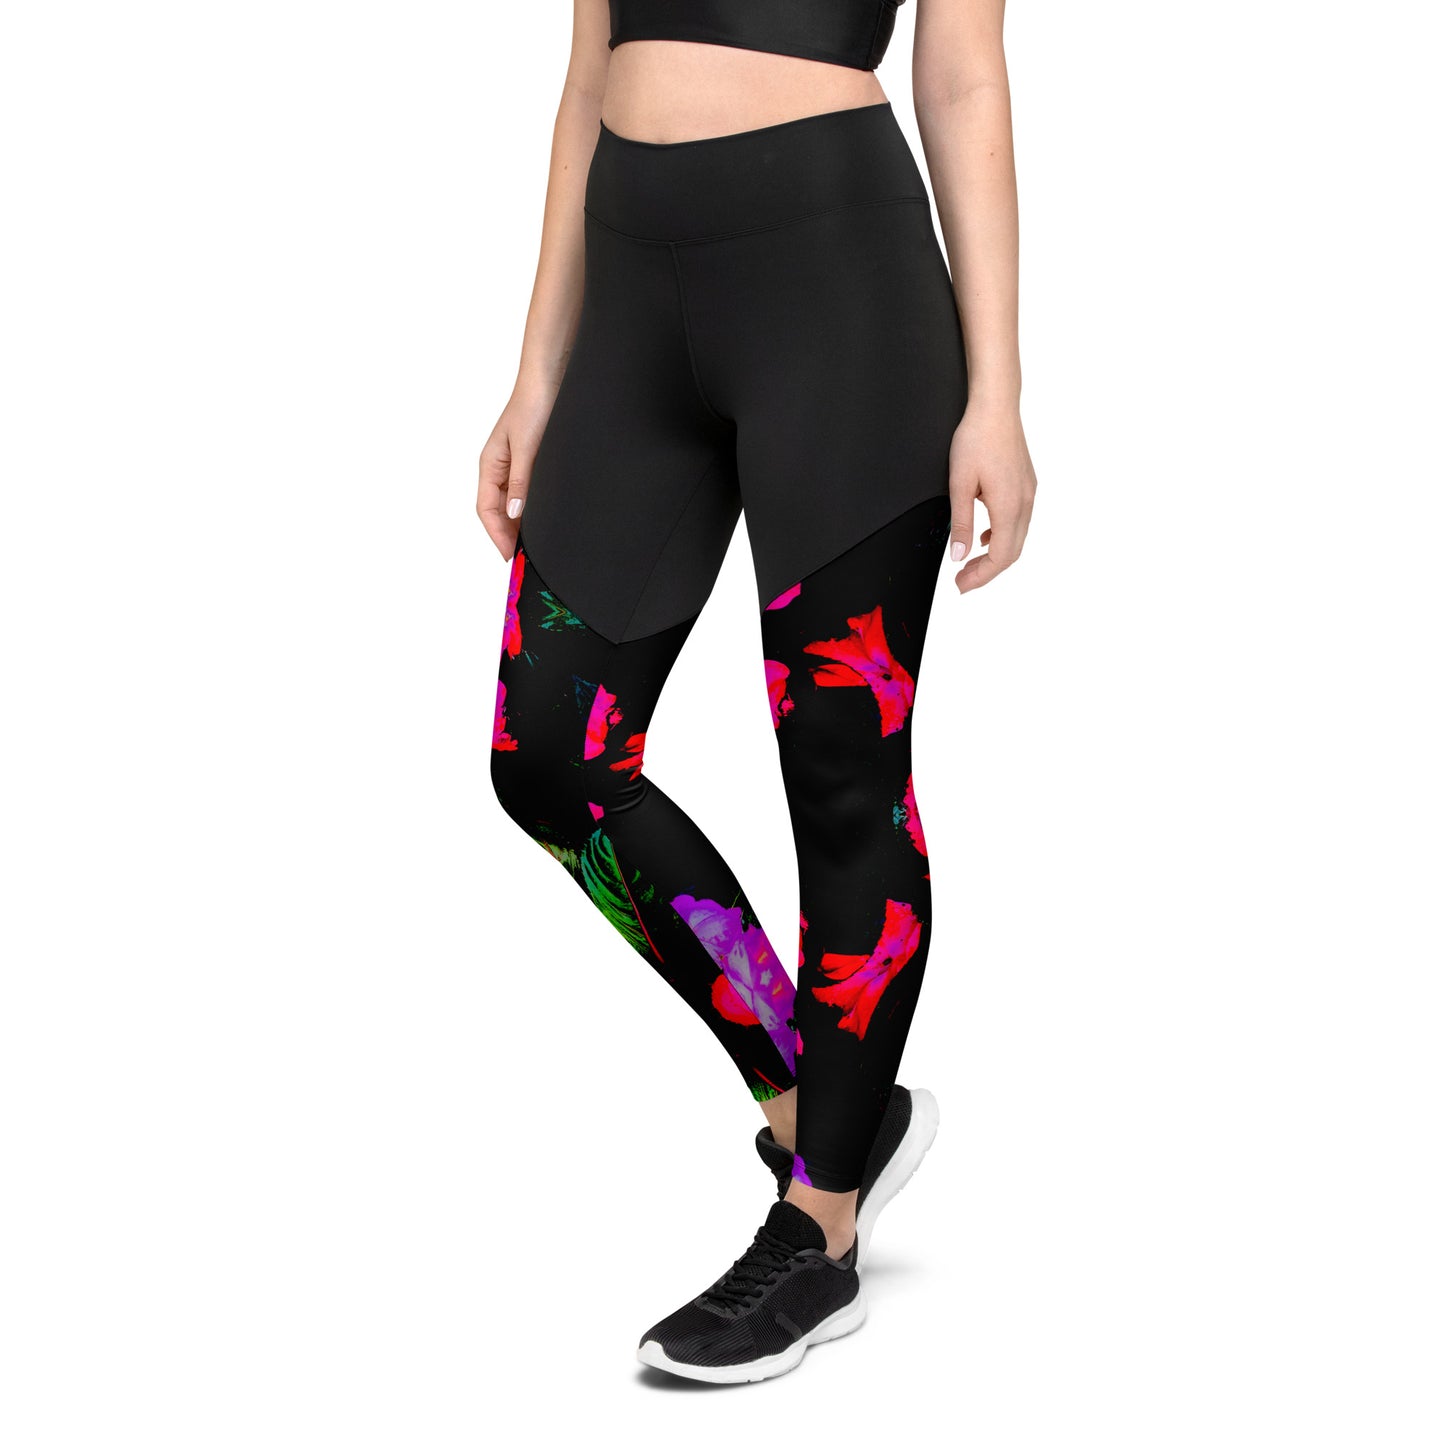 Busy Lizzy Performance Leggings with pocket